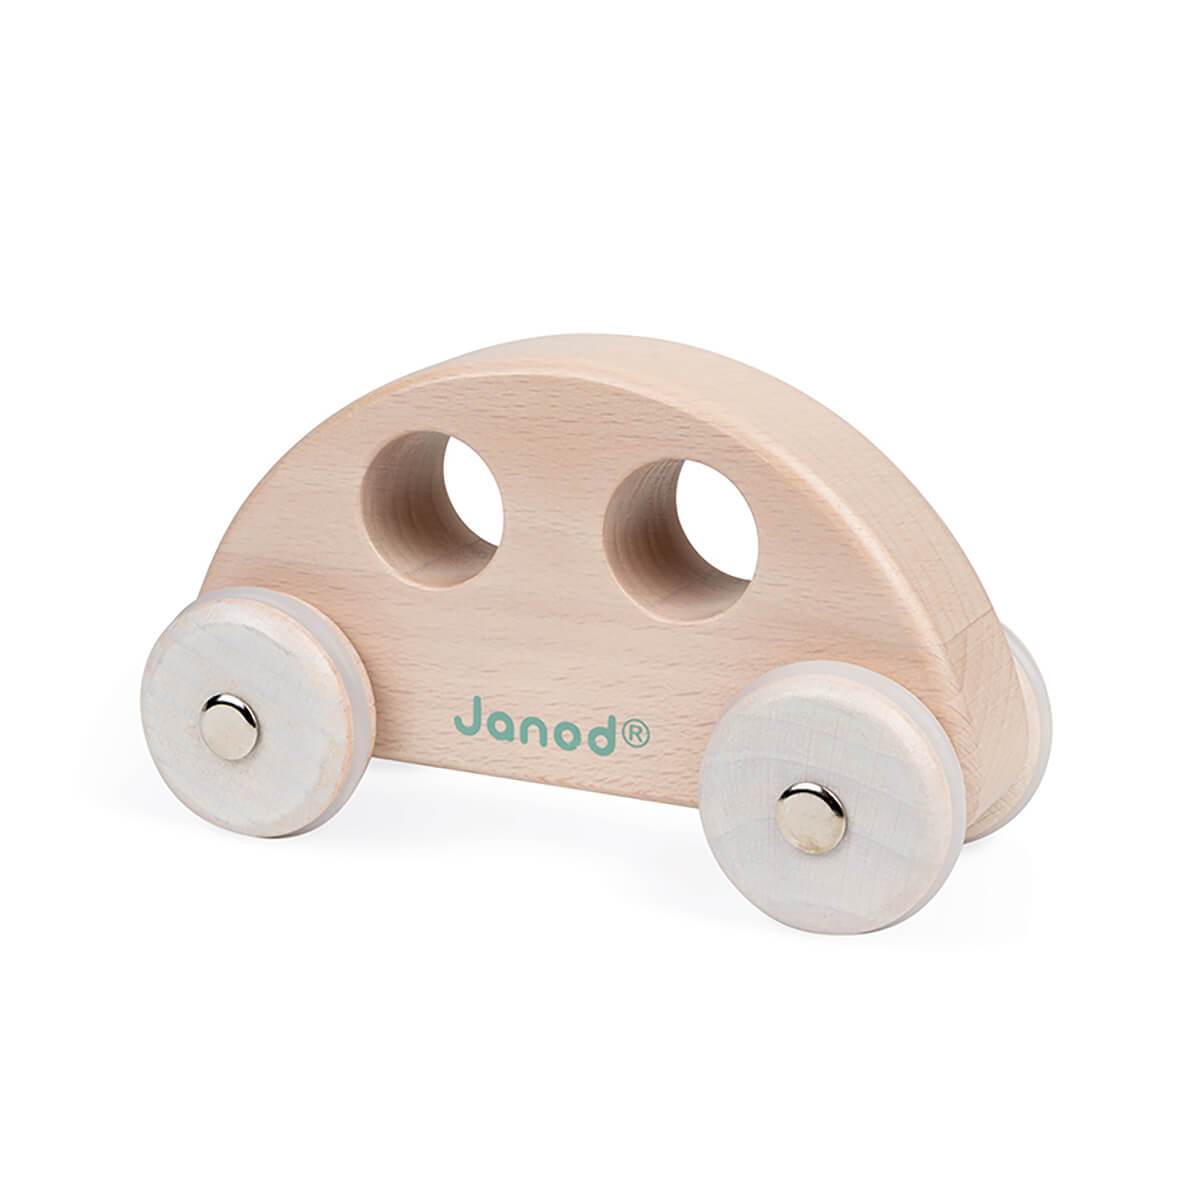 Janod Push Along Wooden Vehicle in Natural makes a lovely little gift for children, available at Nottingham Stockist Alf & Co